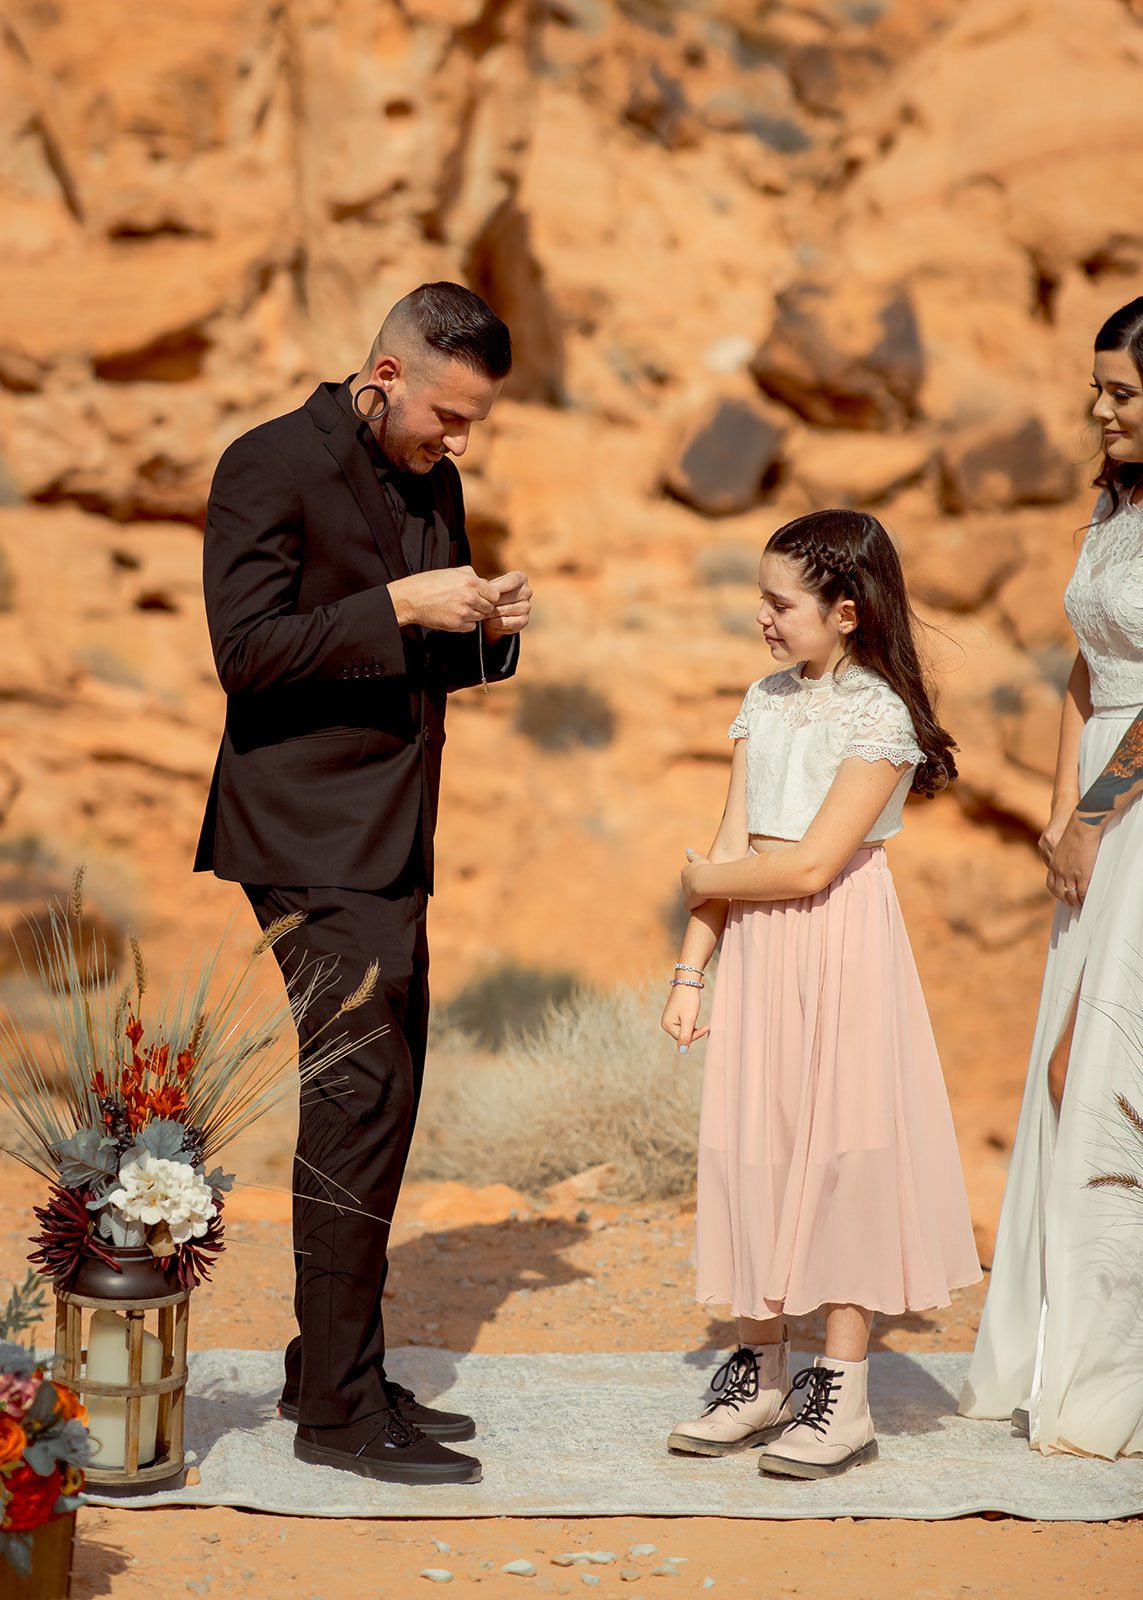 Groom giving daughter gift during elopement ceremony